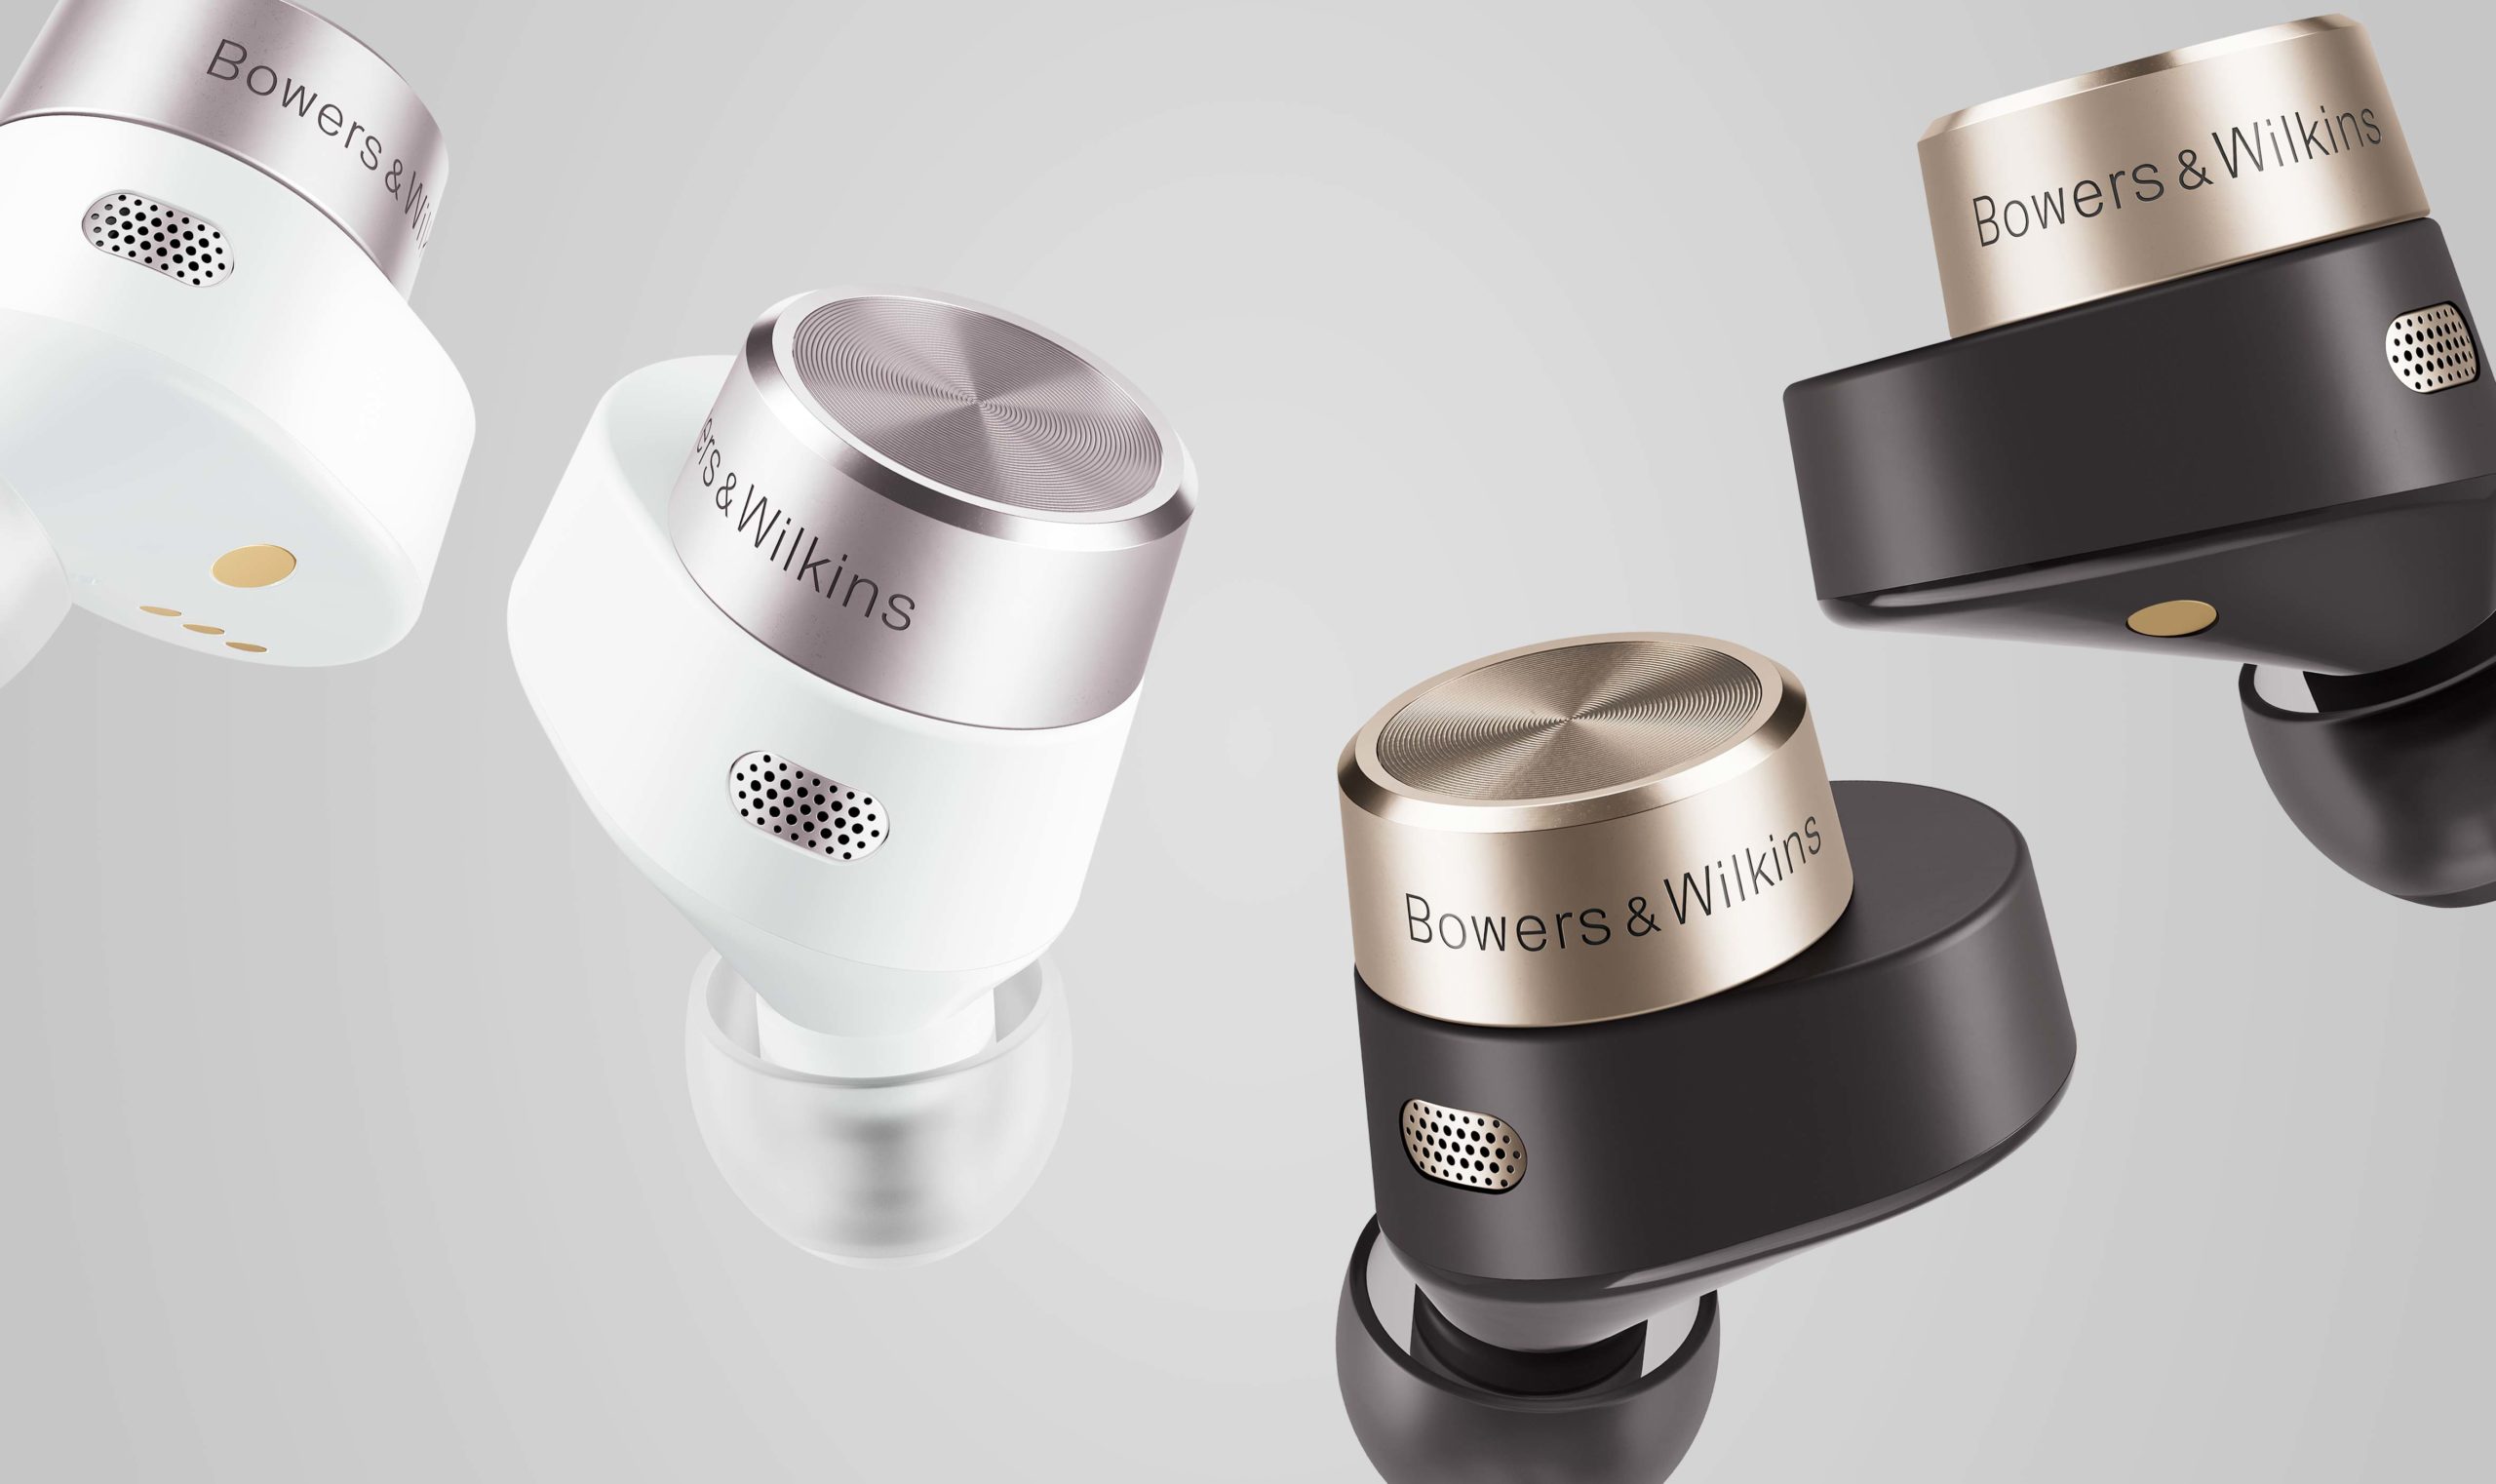 Are Bowers & Wilkins PI7 the Travel-Friendly Earbuds We Need?